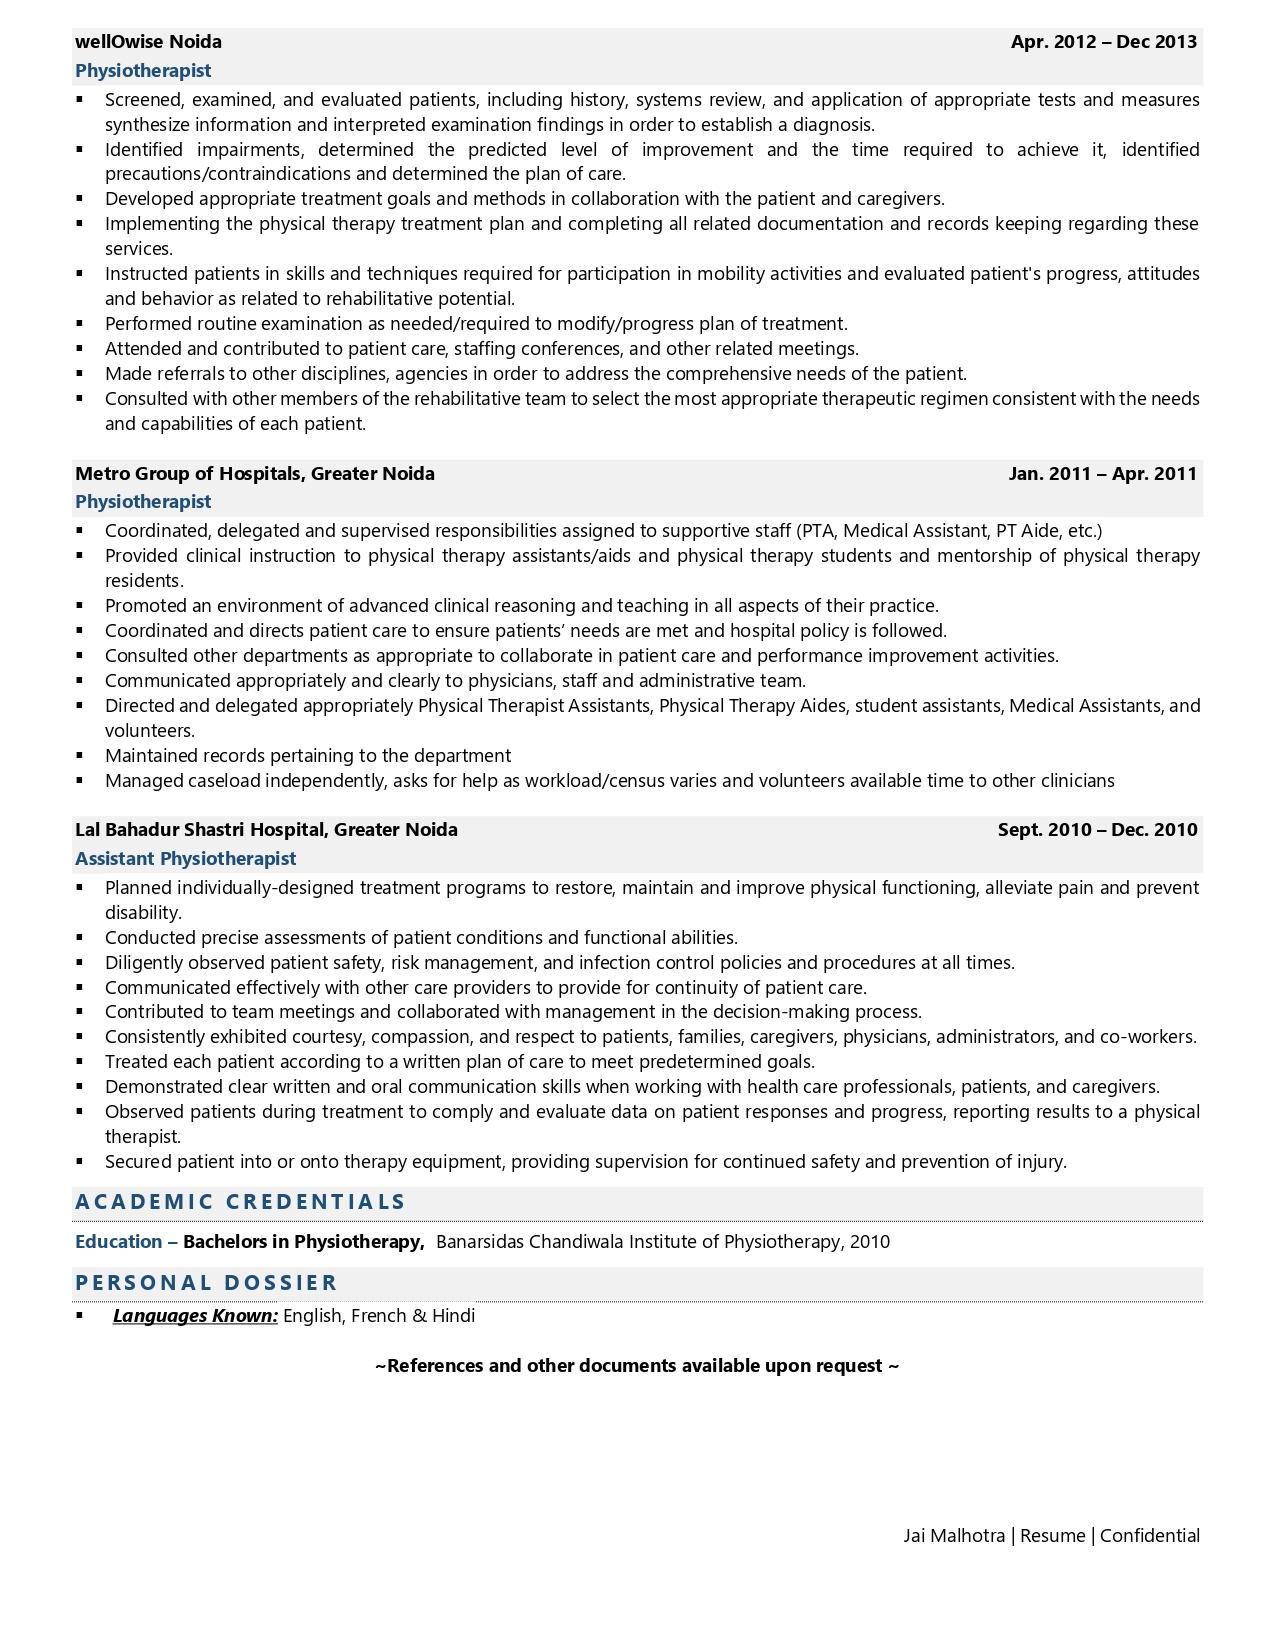 Physiotherapist - Resume Example & Template